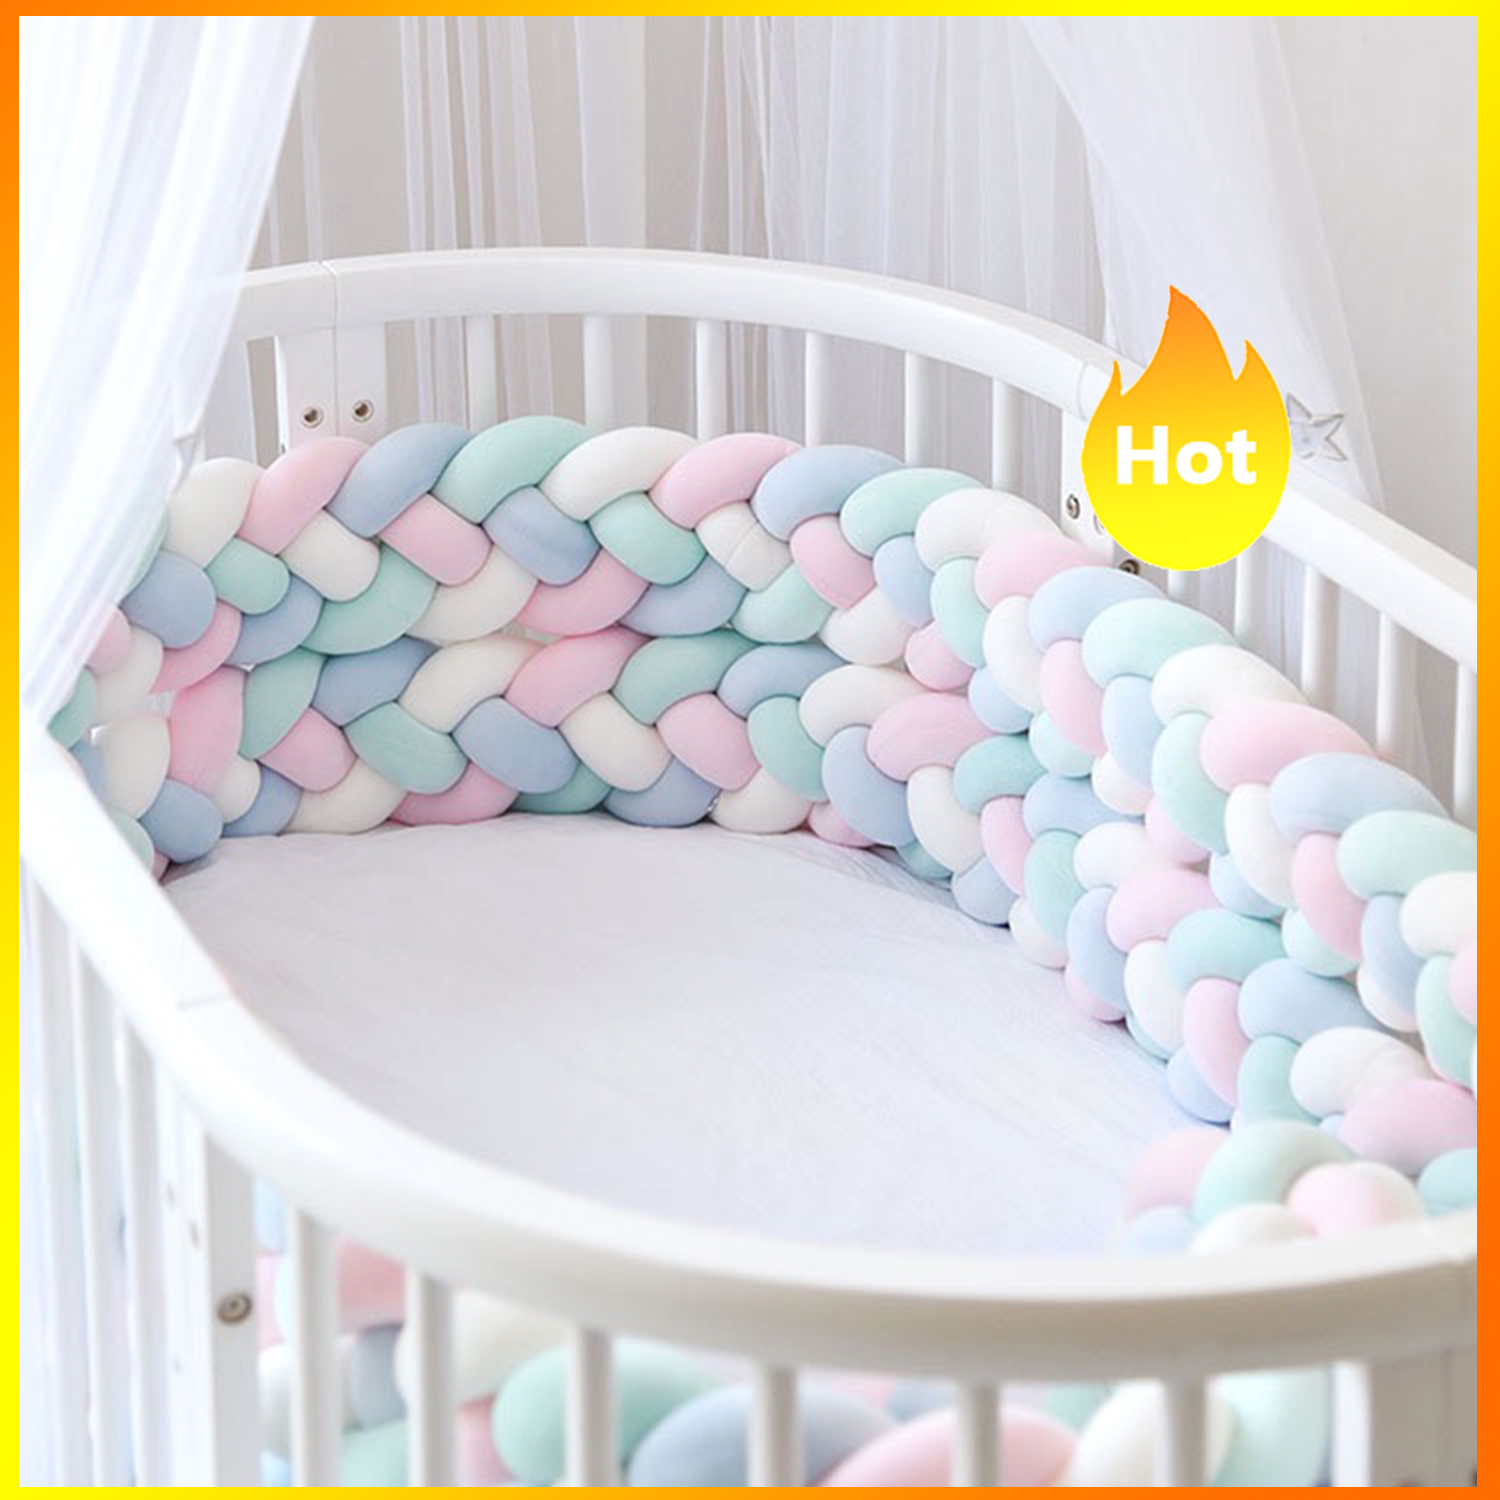 White-Grey-Pink, 78.7 in Baby Braided Crib Bumper Soft Knotted Braided Plush Pillow Cushion Bed Sleep Bumper for Toddler Newborn, 